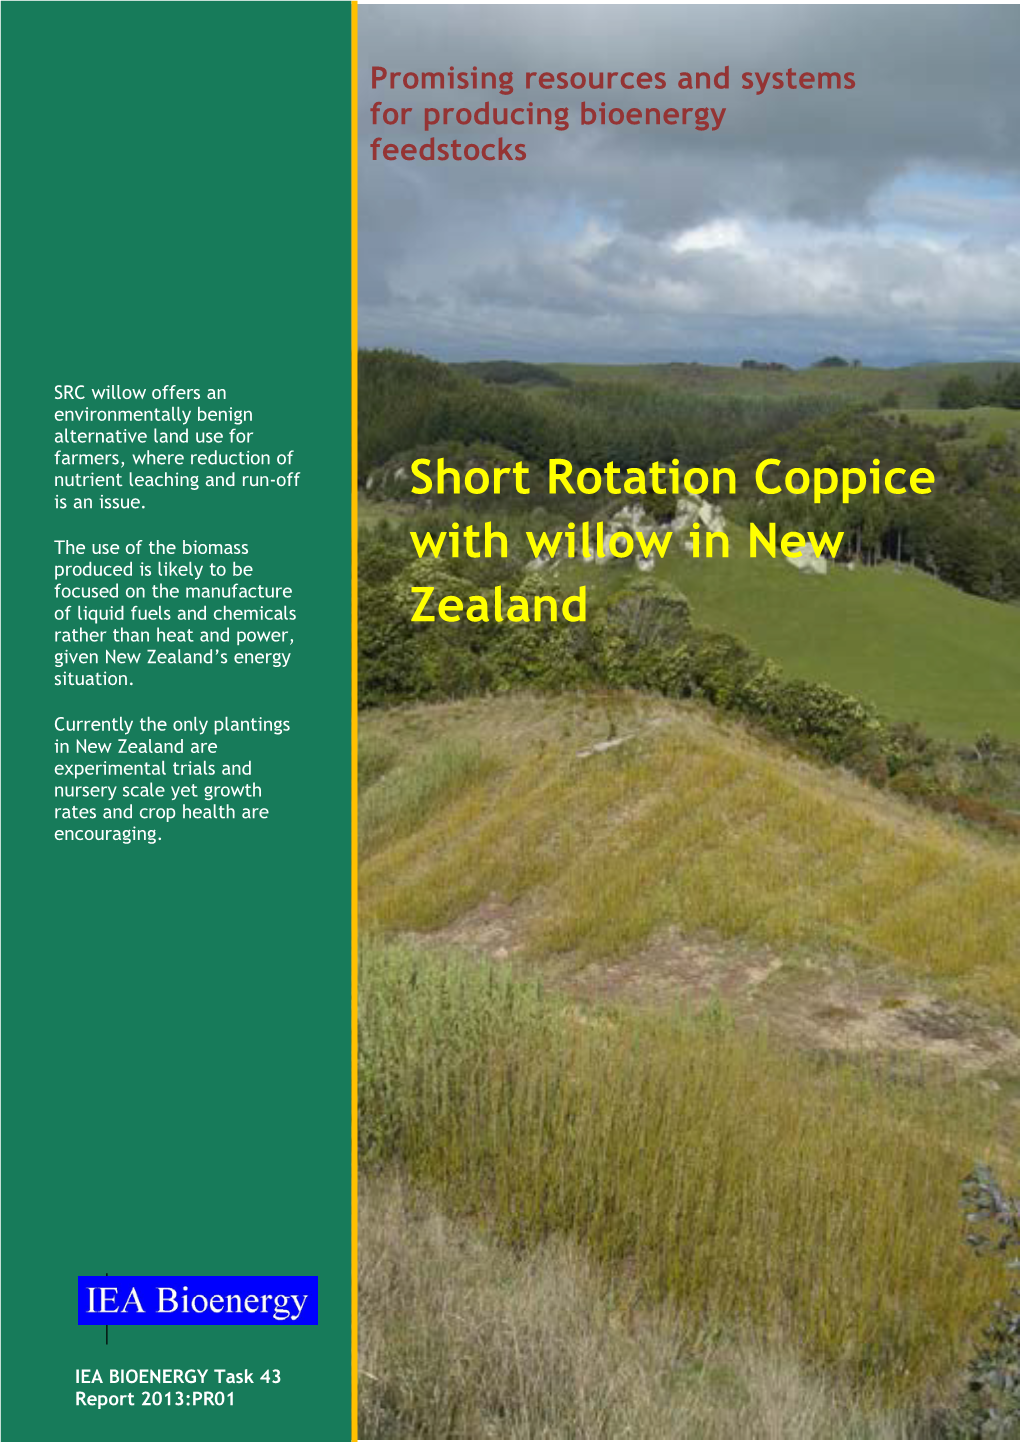 Short Rotation Coppice with Willow in New Zealand